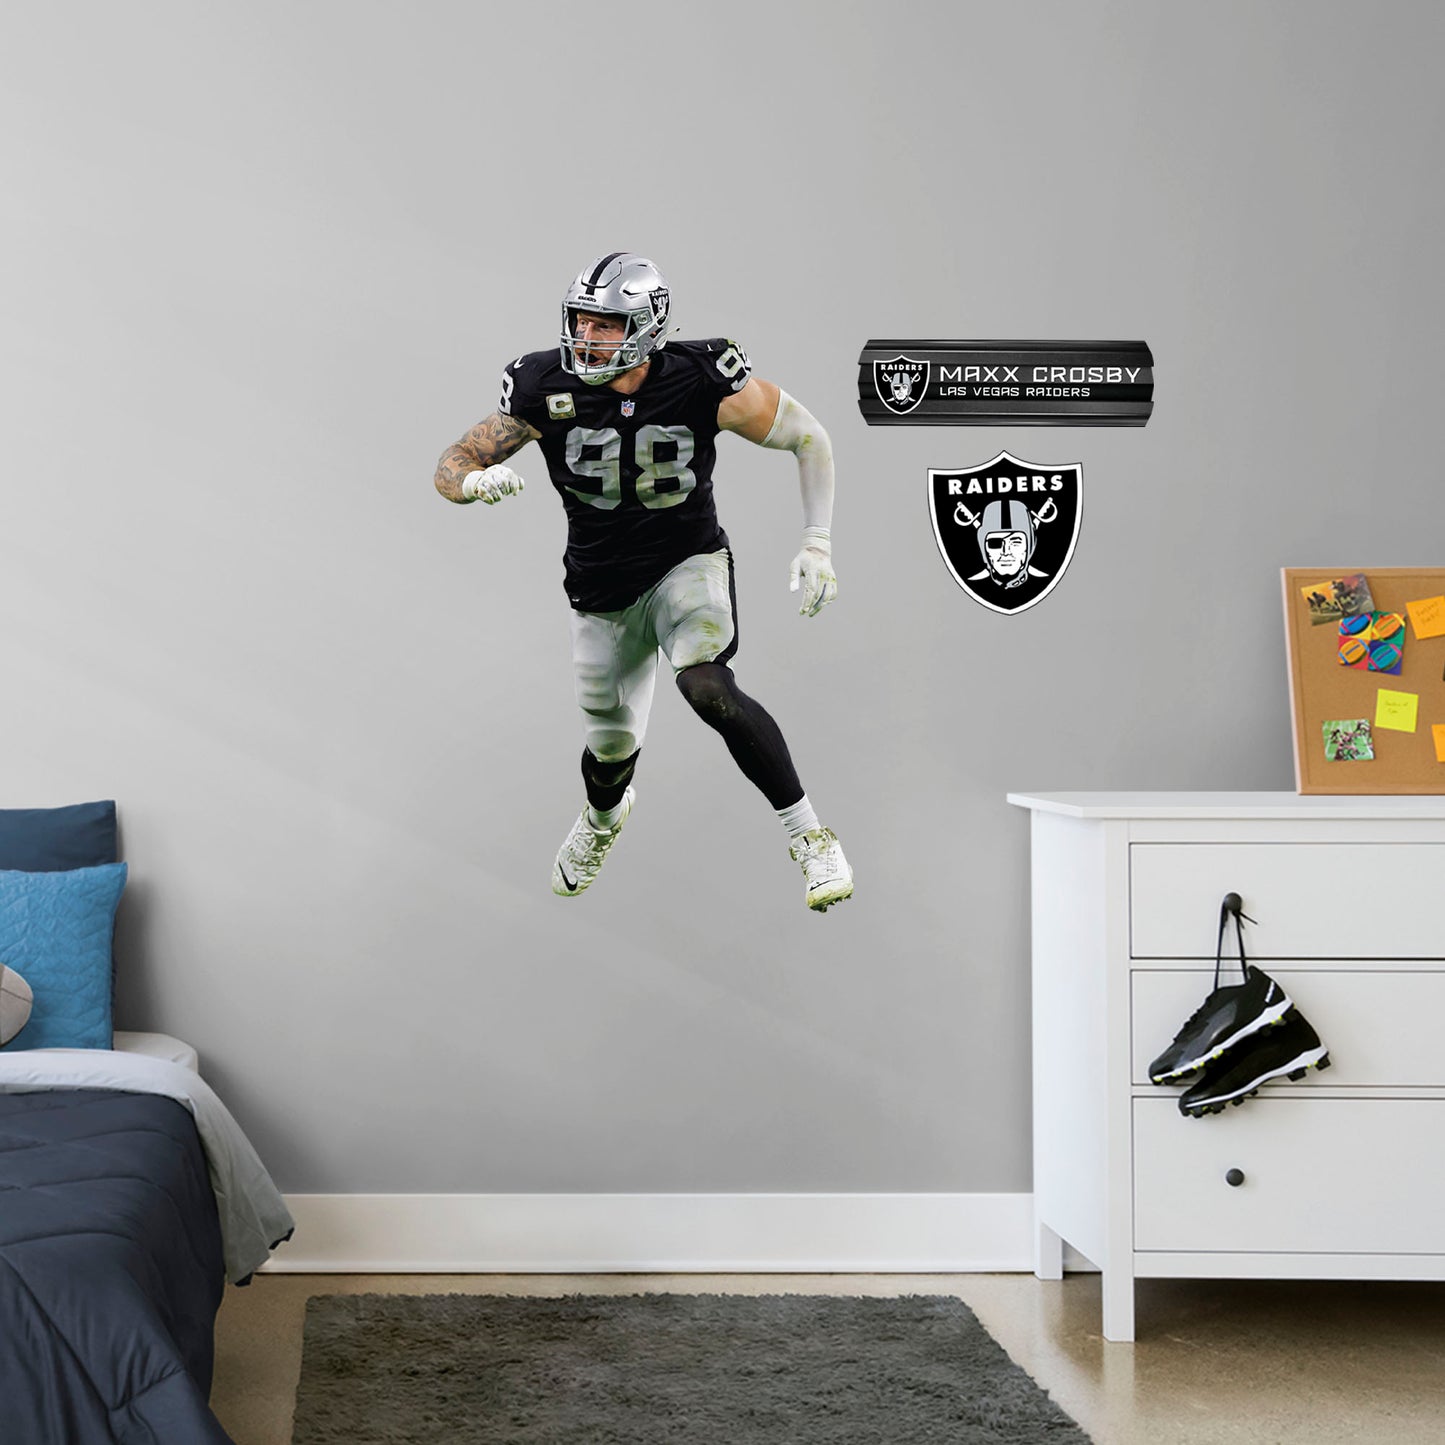 Las Vegas Raiders: Maxx Crosby         - Officially Licensed NFL Removable     Adhesive Decal